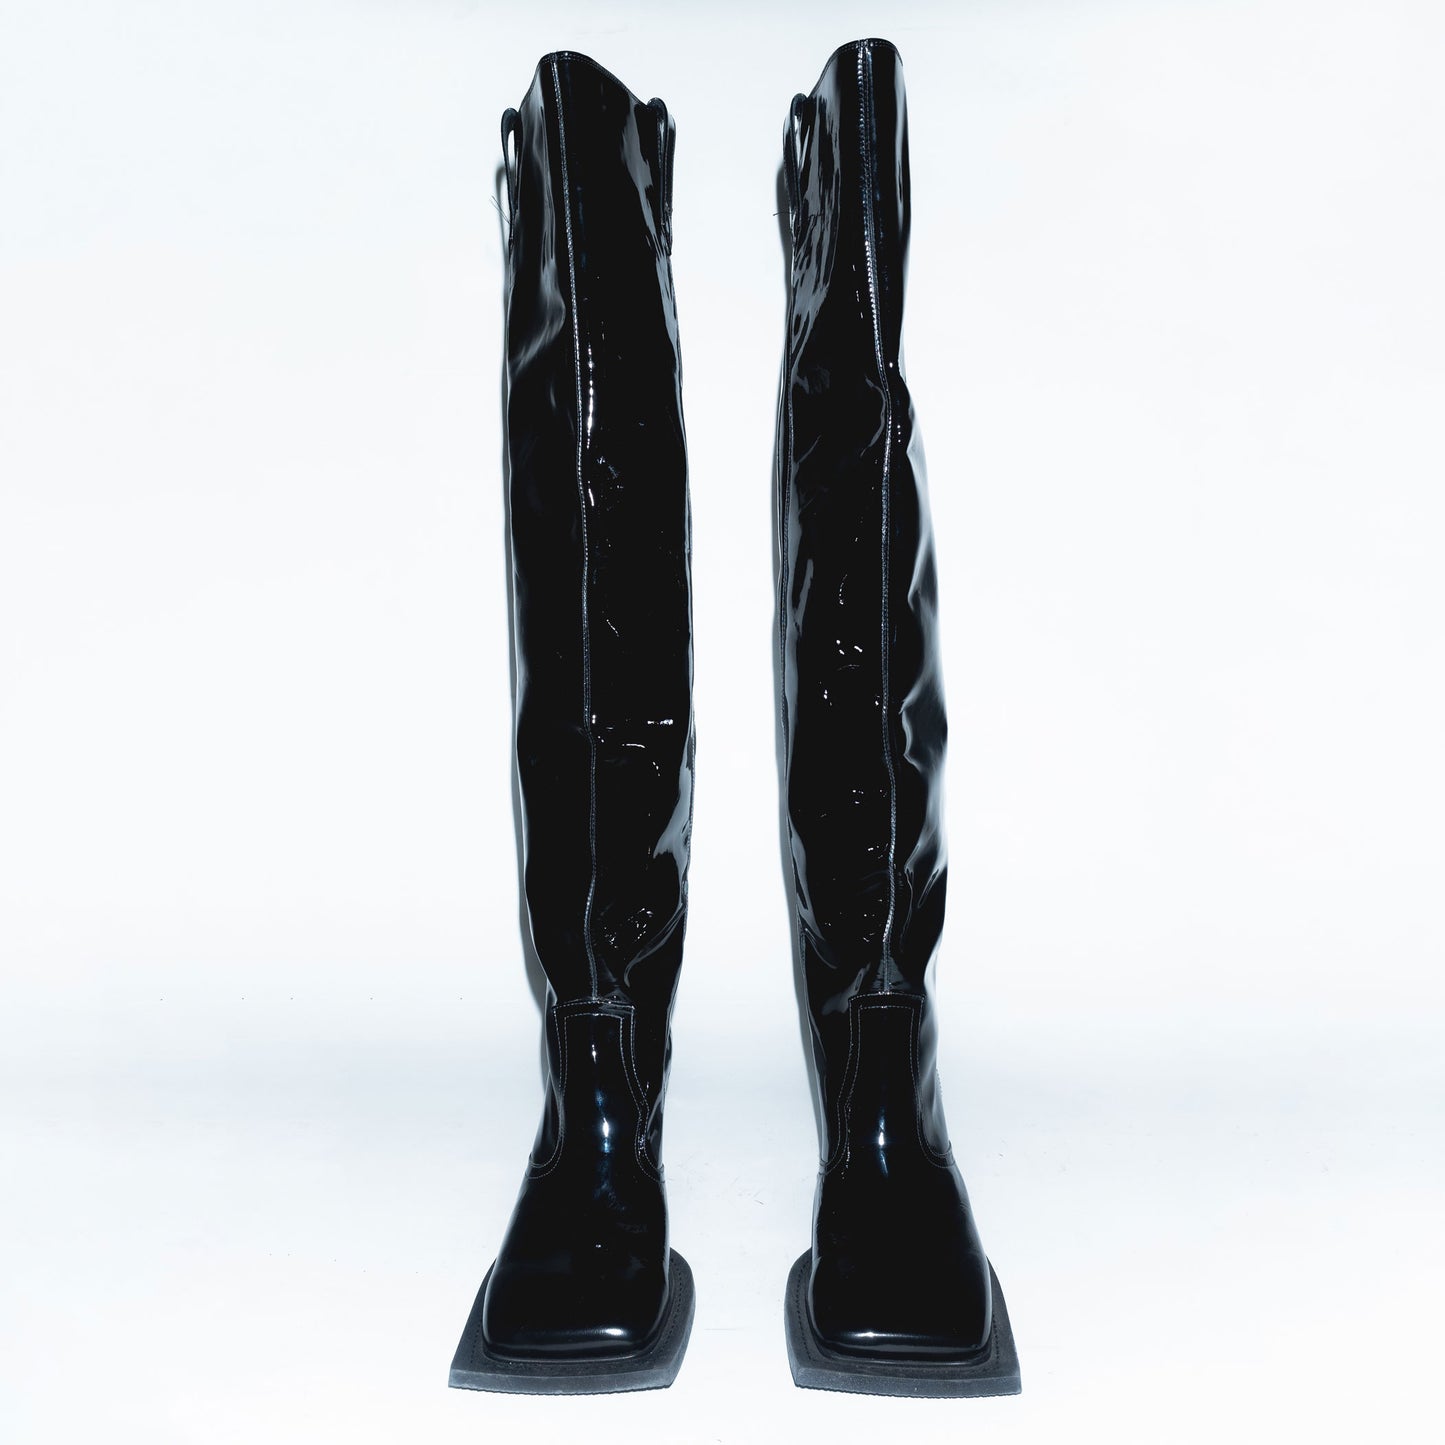 Runway Howling Knee High Boots in Black Patent Leather